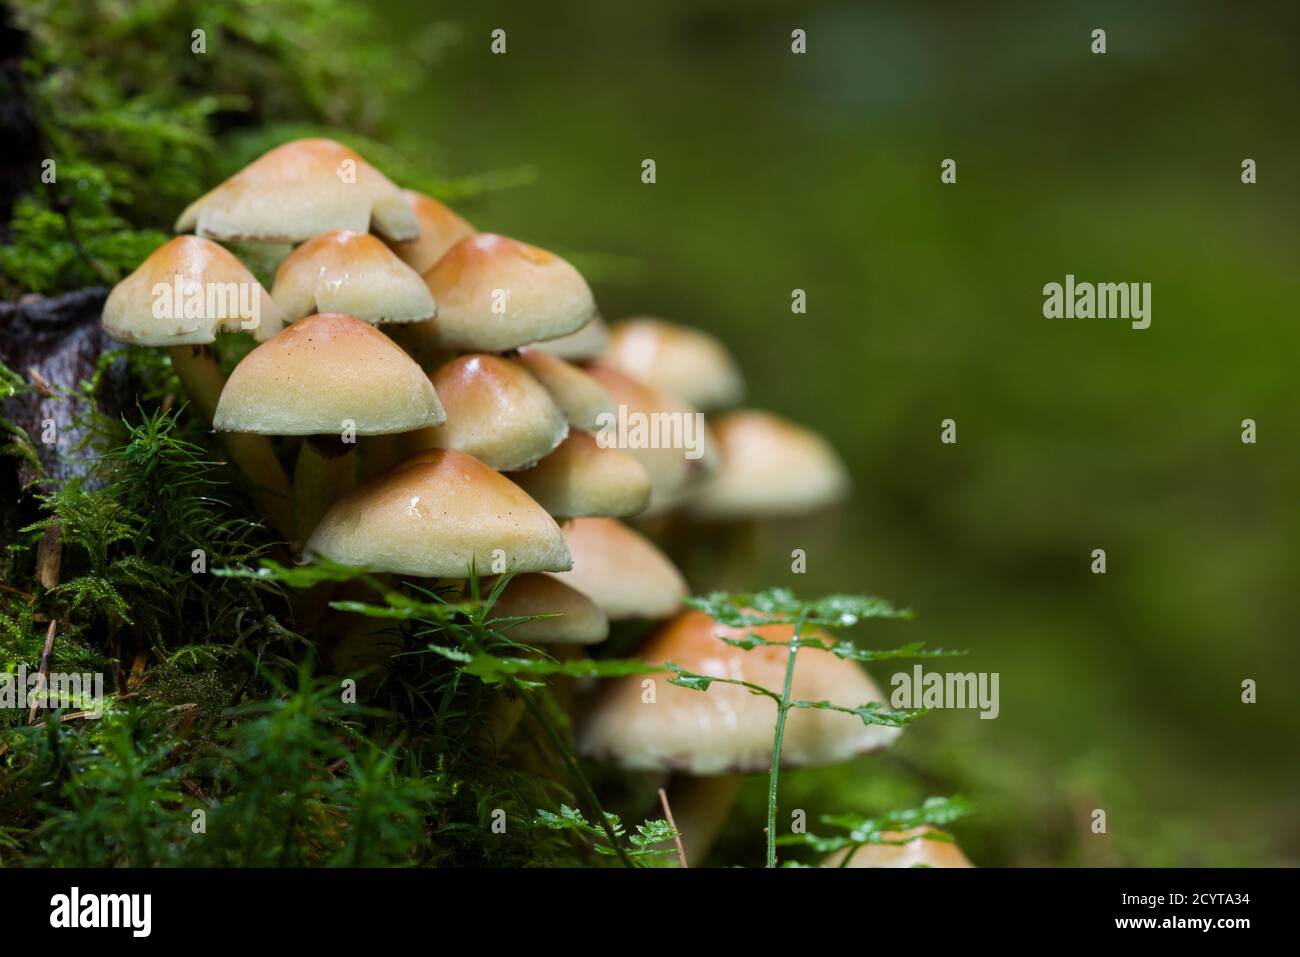 Sulphur Tuft (Hypholoma fasciculare) mushrooms, or Clustered Woodlover, on a moss covered tree stump in a woodland in the Mendip Hills, Somerset, England. Stock Photo